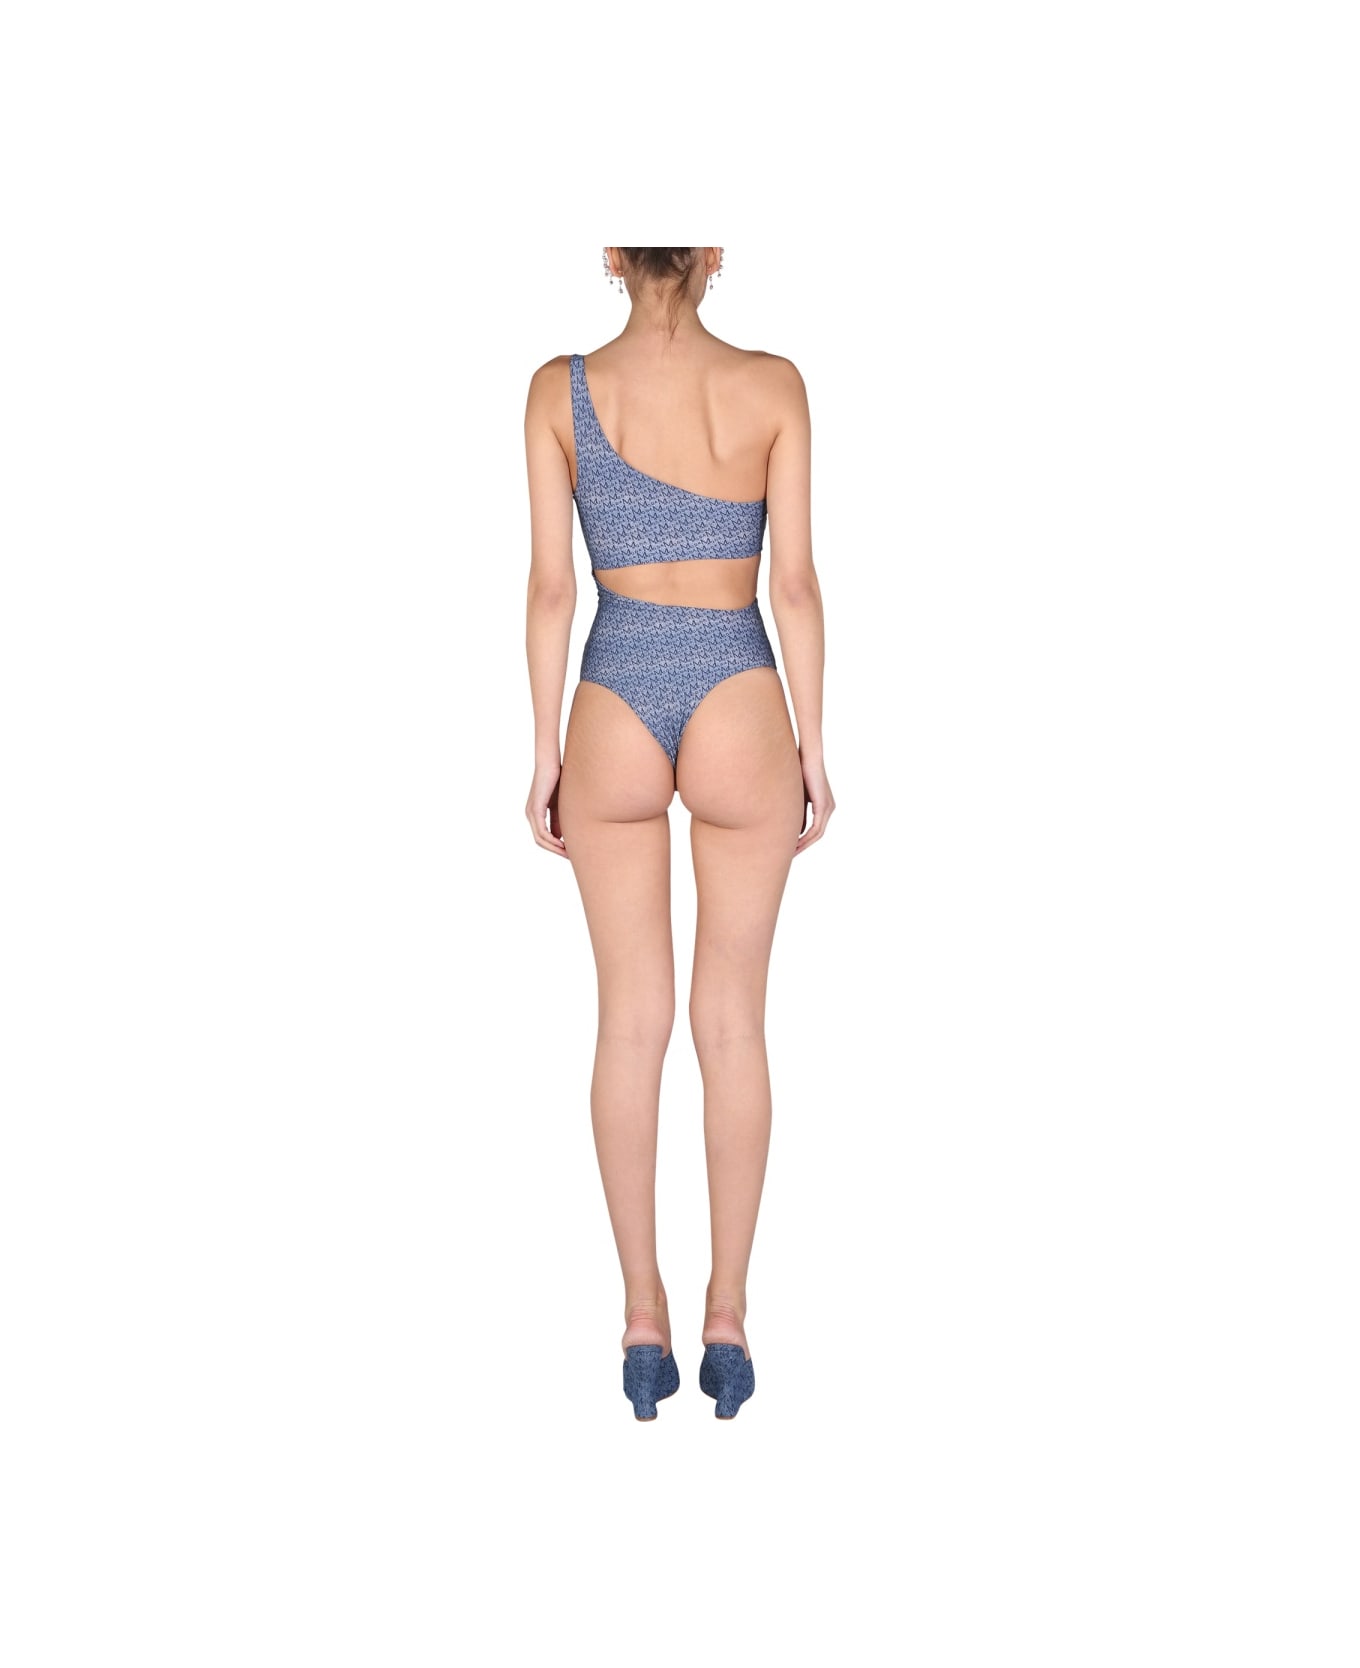 Magda Butrym One Piece Cut-out Swimsuit - BLUE 水着